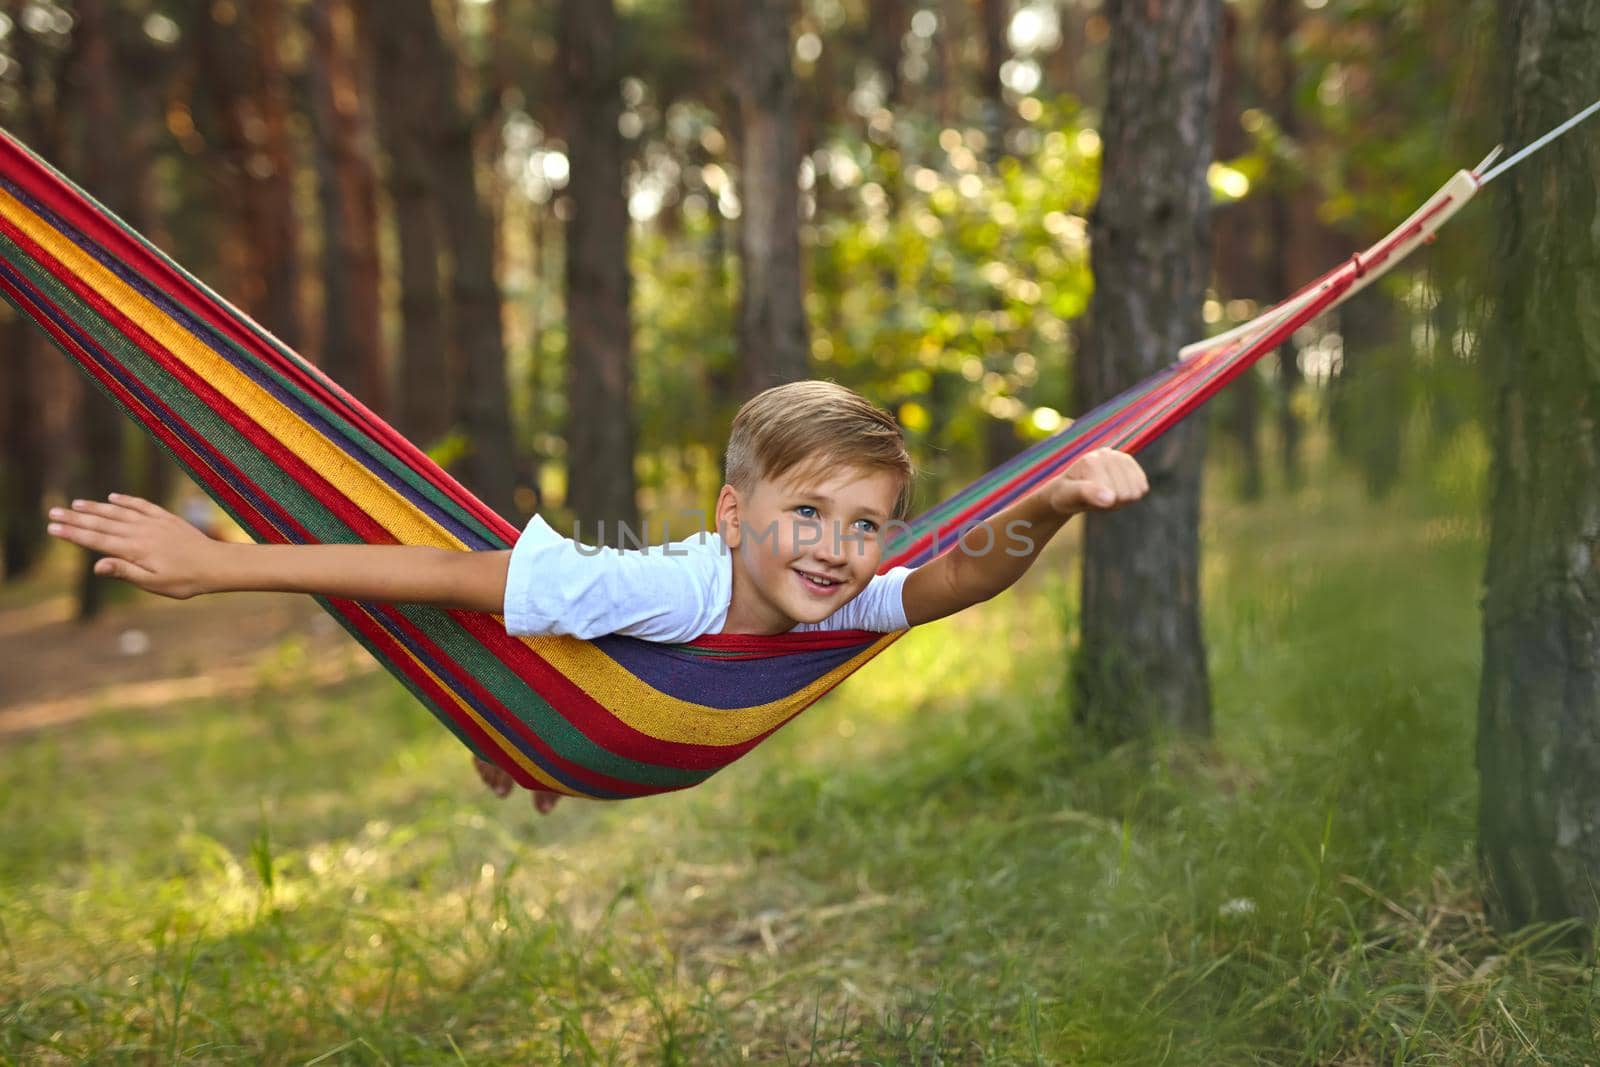 Cute boy is lying in a colorful hammock. The kid is riding in a hammock imagines himself as a flying superhero. Leisure and relax concept